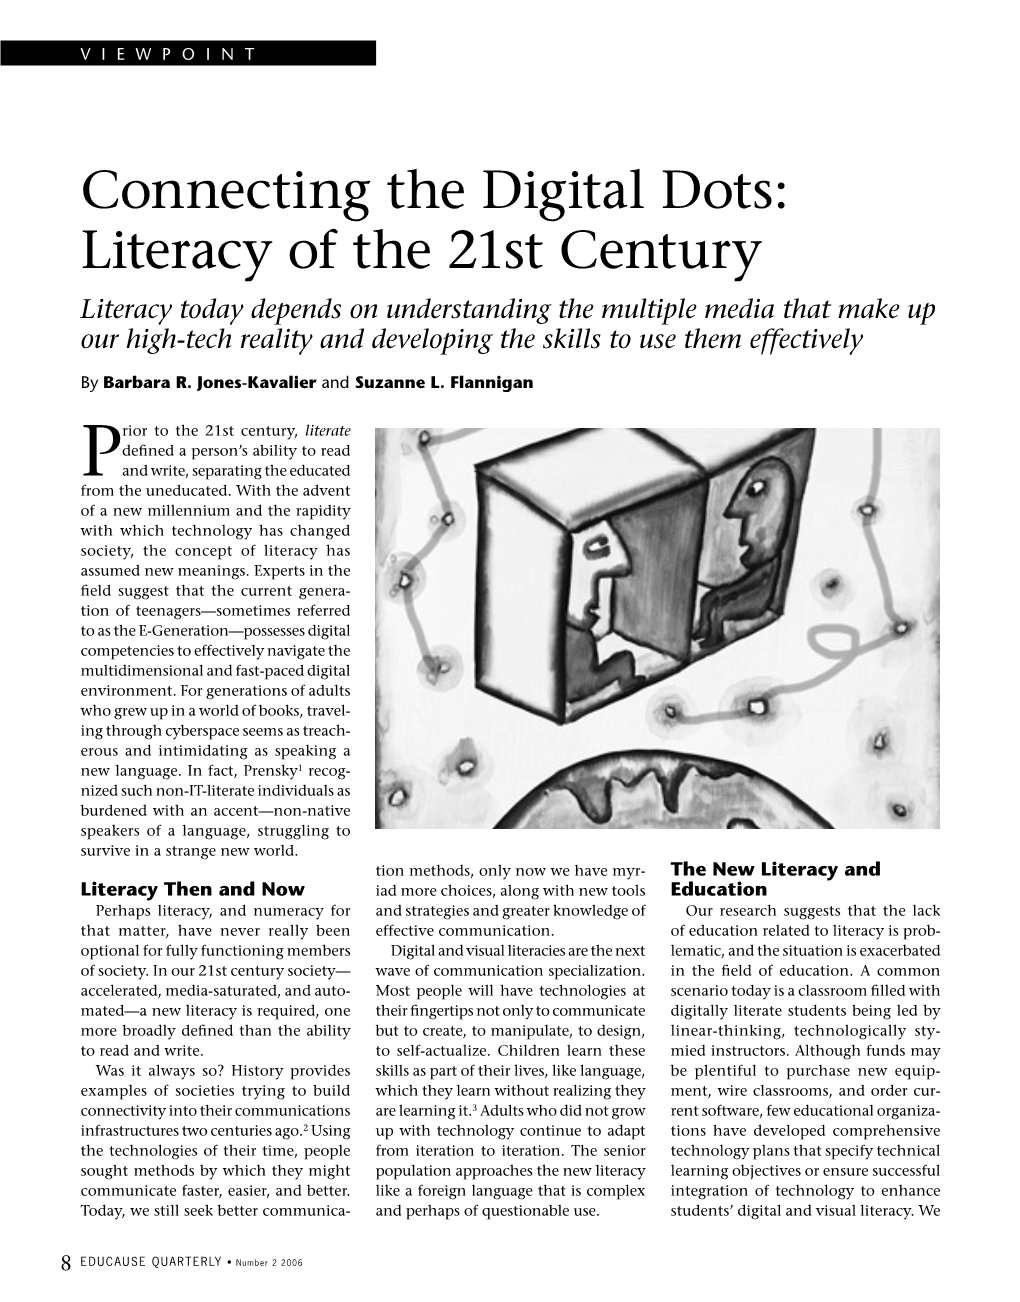 Connecting the Digital Dots: Literacy of the 21St Century